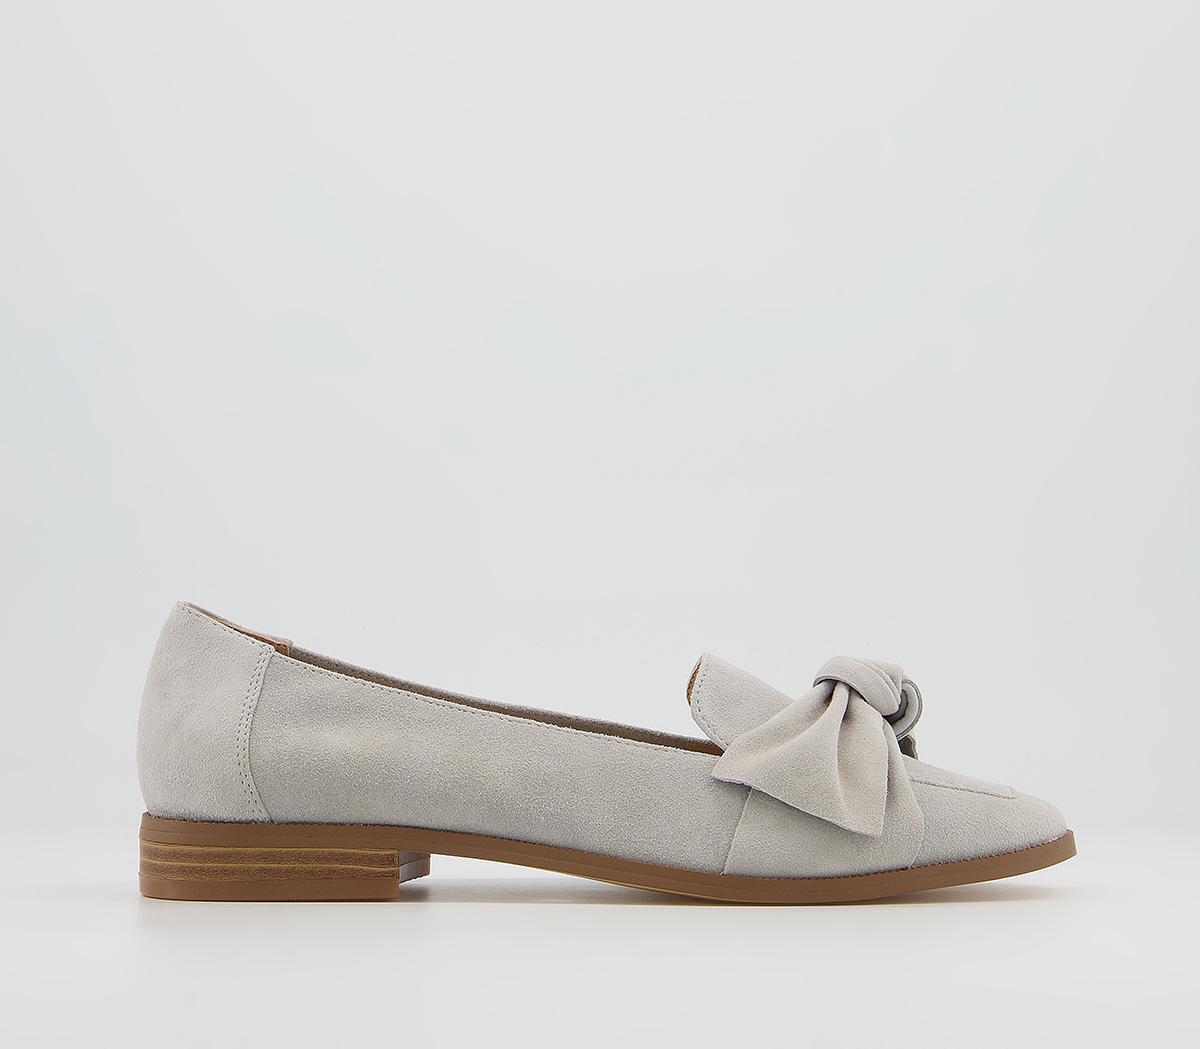 OFFICEFlurry Bow LoafersLight Grey Suede